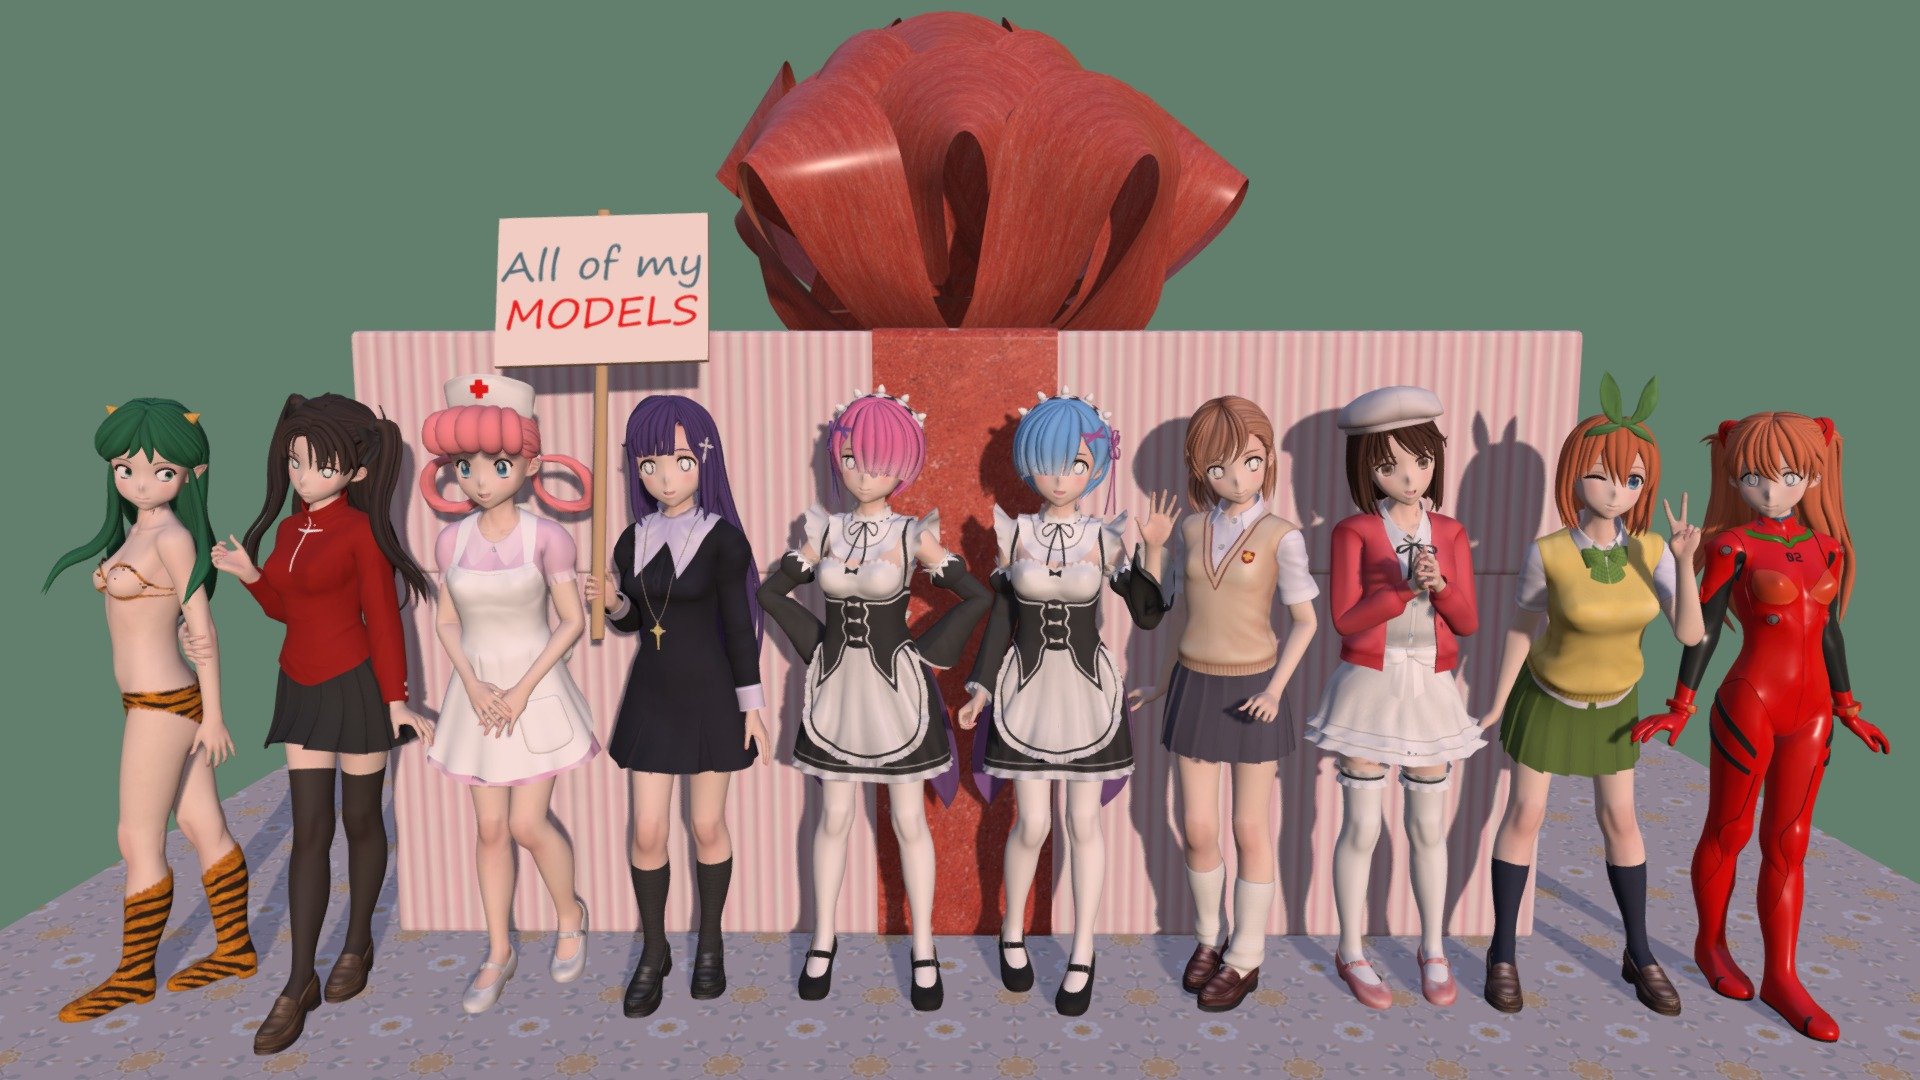 This product include all of my models (T-pose rigged and posed models) which have been published on Sketchfab.

These models are based on famous female characters from various Japanese anime series. There are over 40 characters and over 100 models currently.

It will save you huge cost compared to buying the models separately.

This product will be updated when I publish new models. After purchasing it, you can get any of my lastest models in future. 

Please see details of each model in my two collections:

&mdash; Rigged models collection

&mdash; Posed models collection

If you have any questions, please leave a comment or contact me via my email 3d.eden.project@gmail.com 3d model